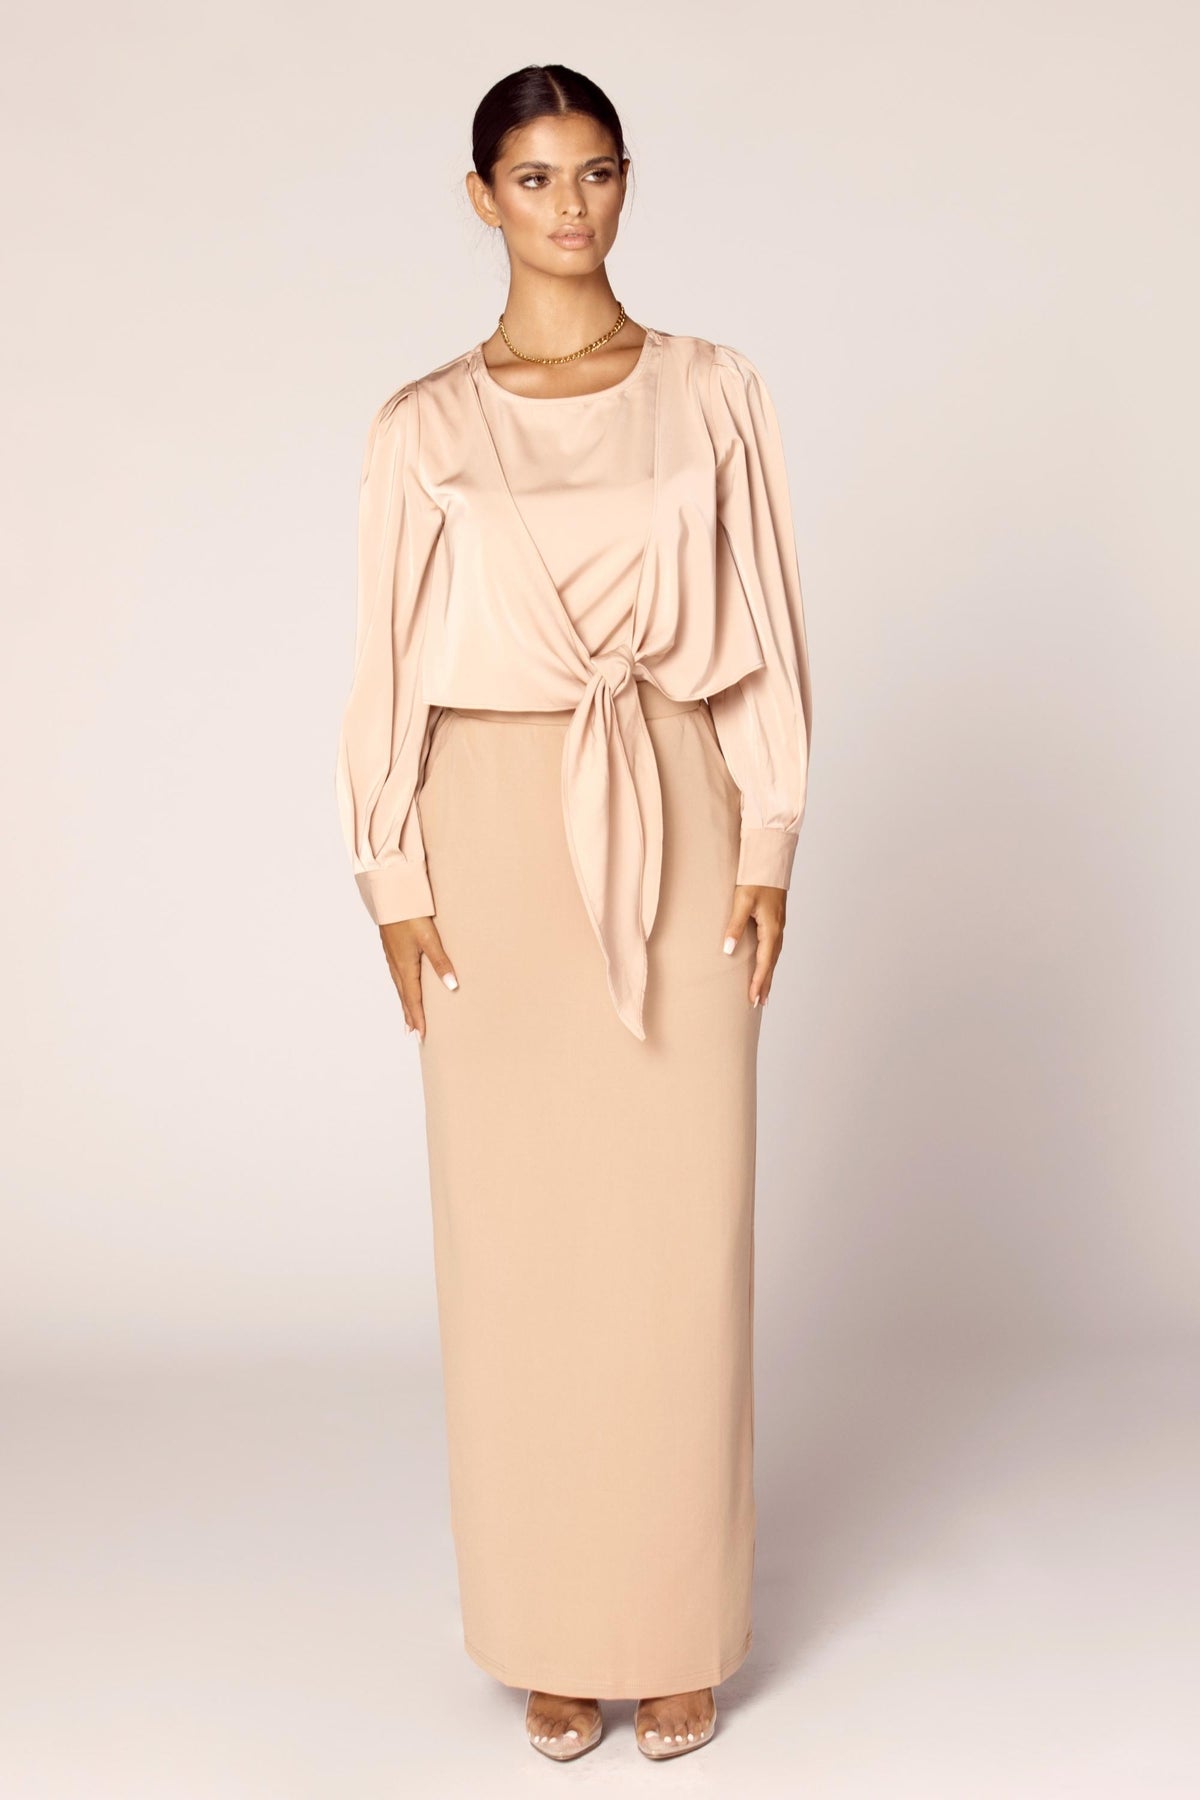 Essential Maxi Skirt - Camel Nude Veiled Collection 